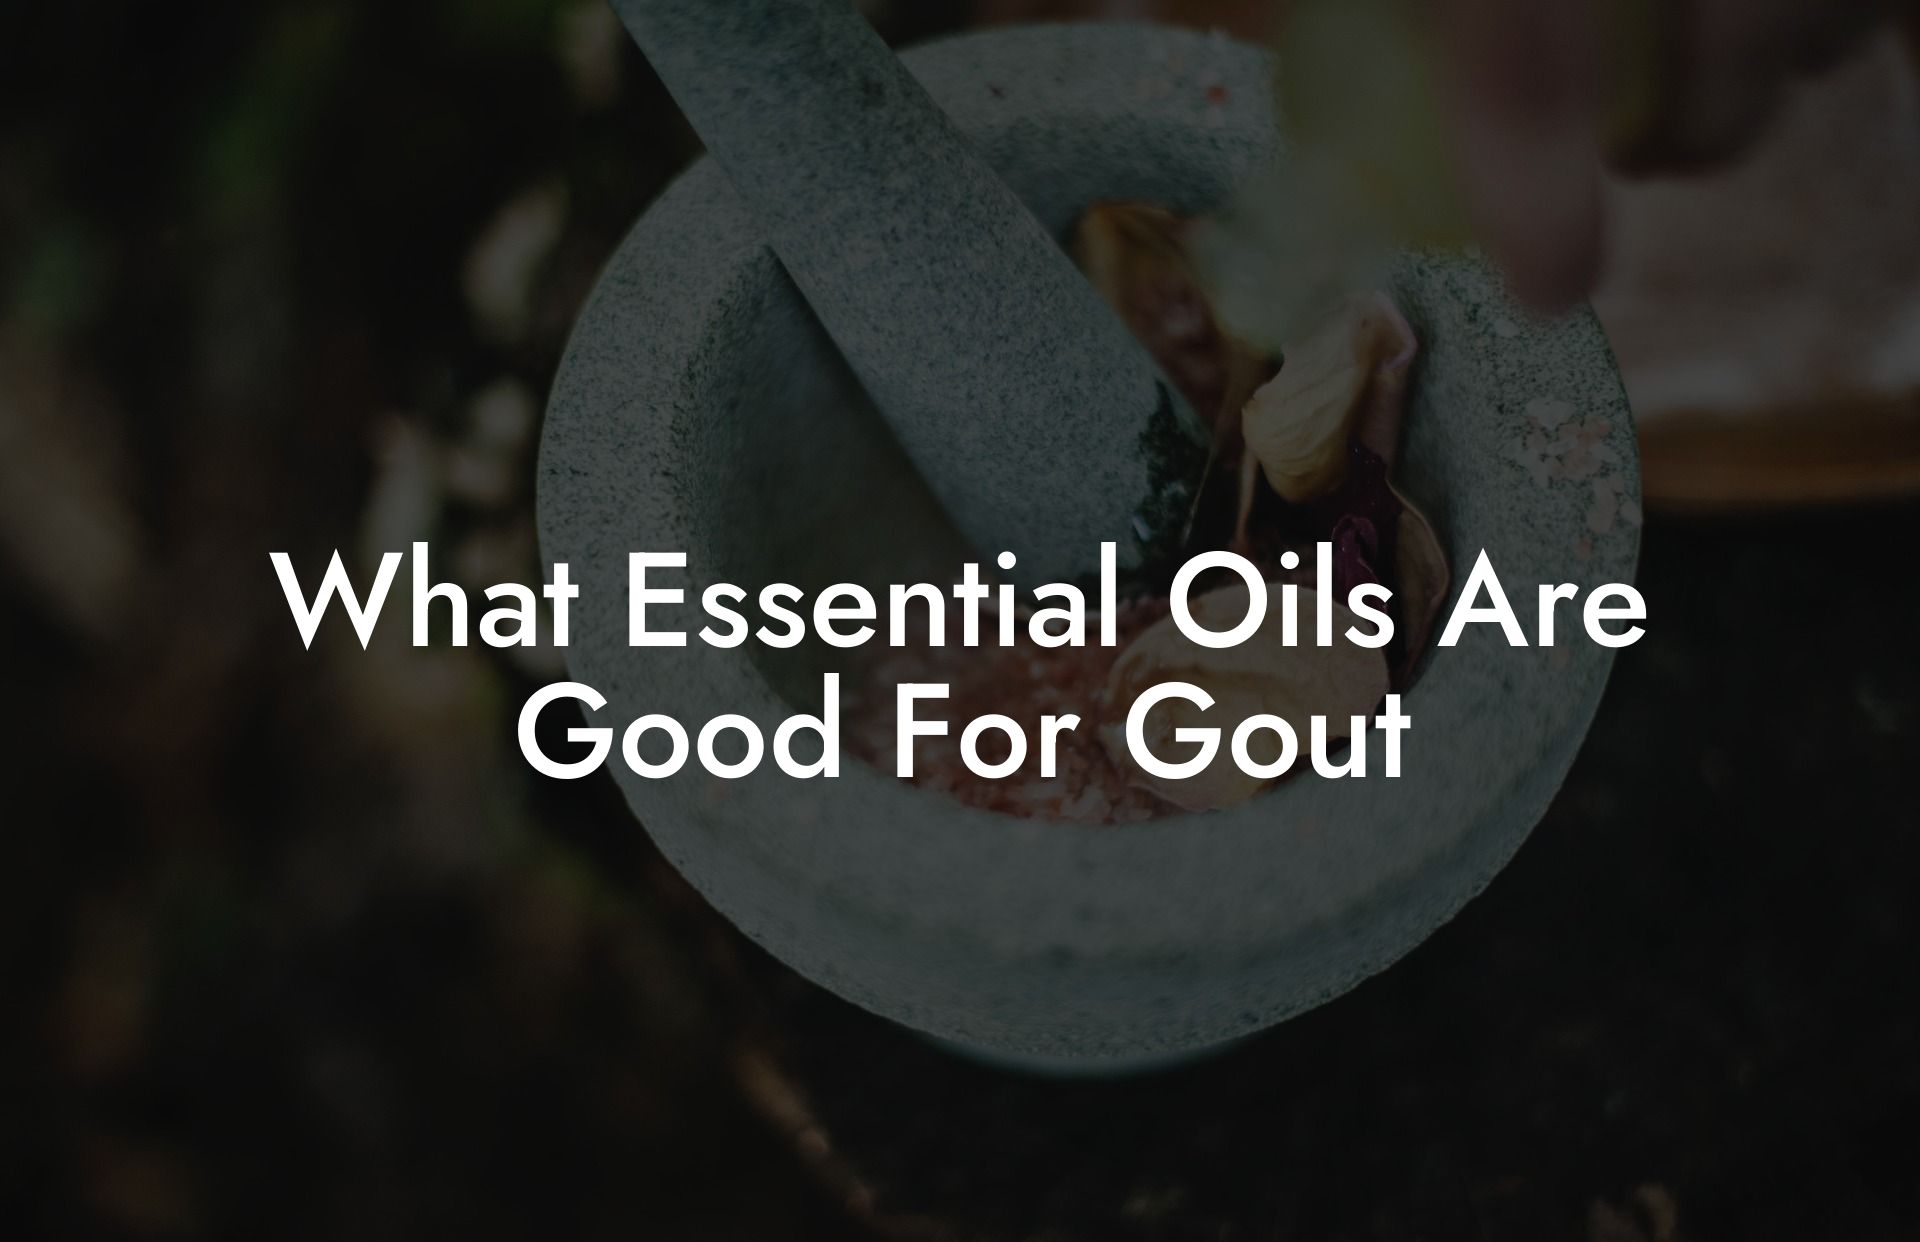 What Essential Oils Are Good For Gout